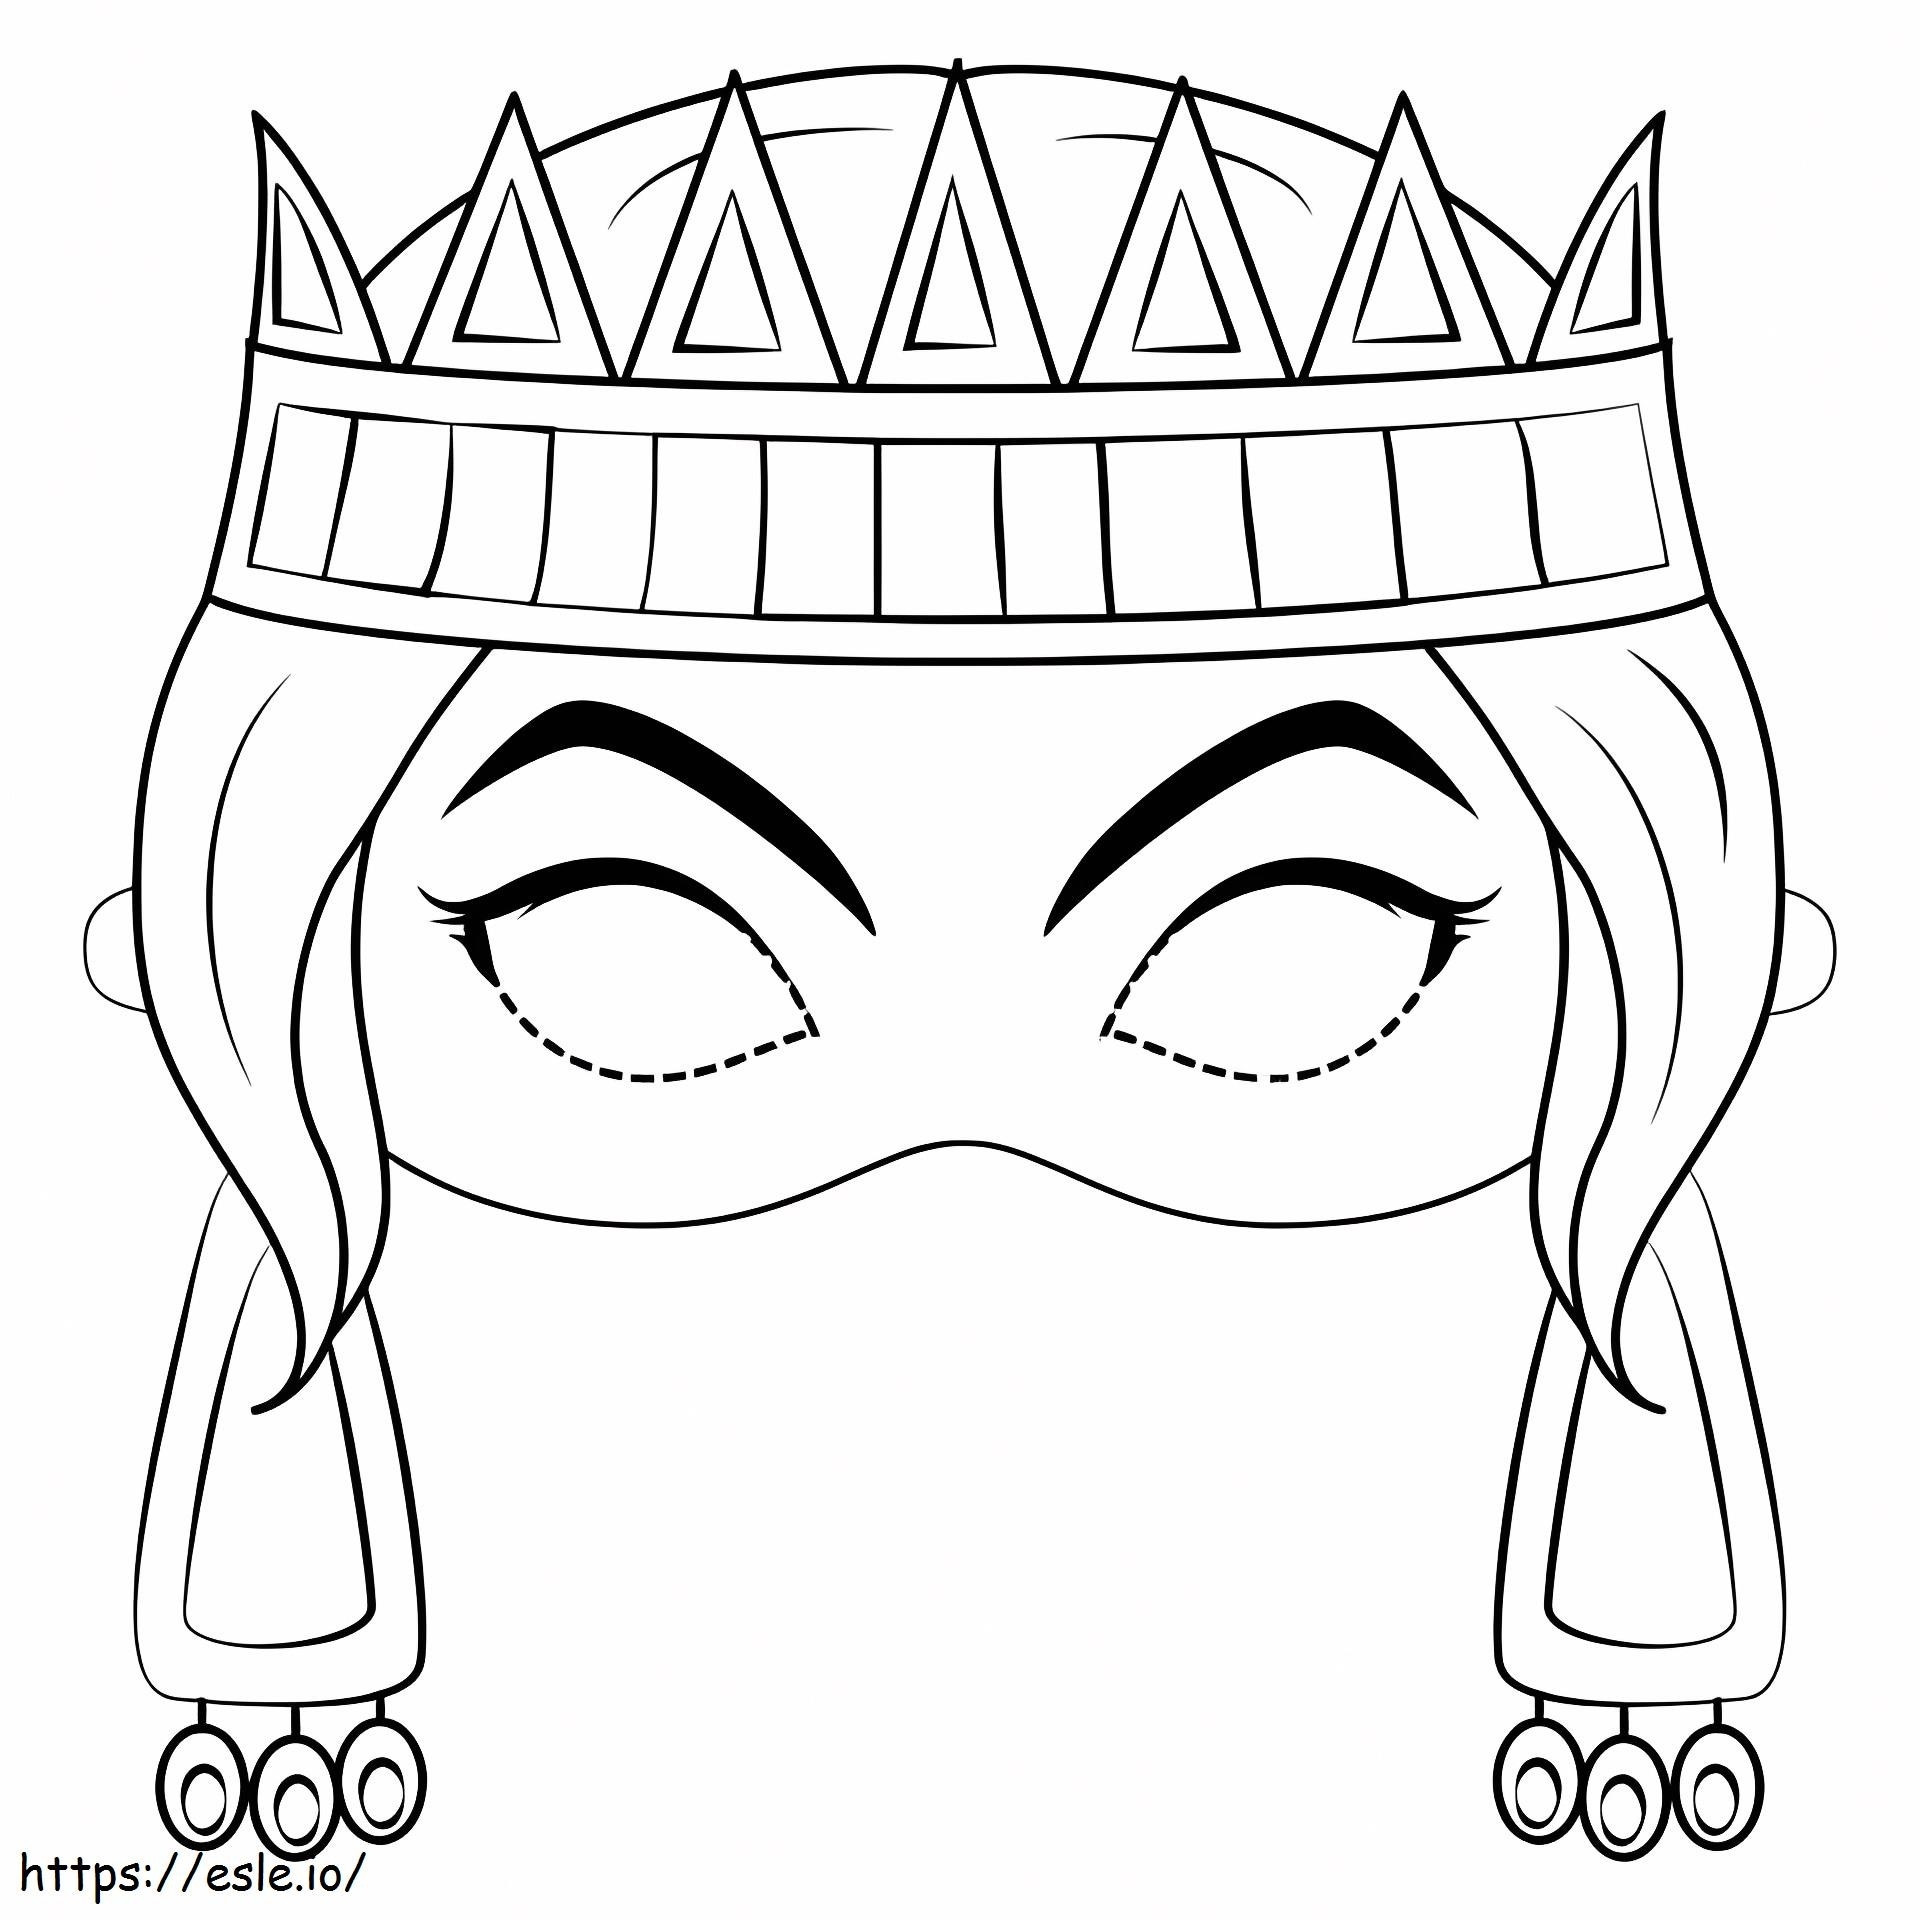 Queen Mask coloring page